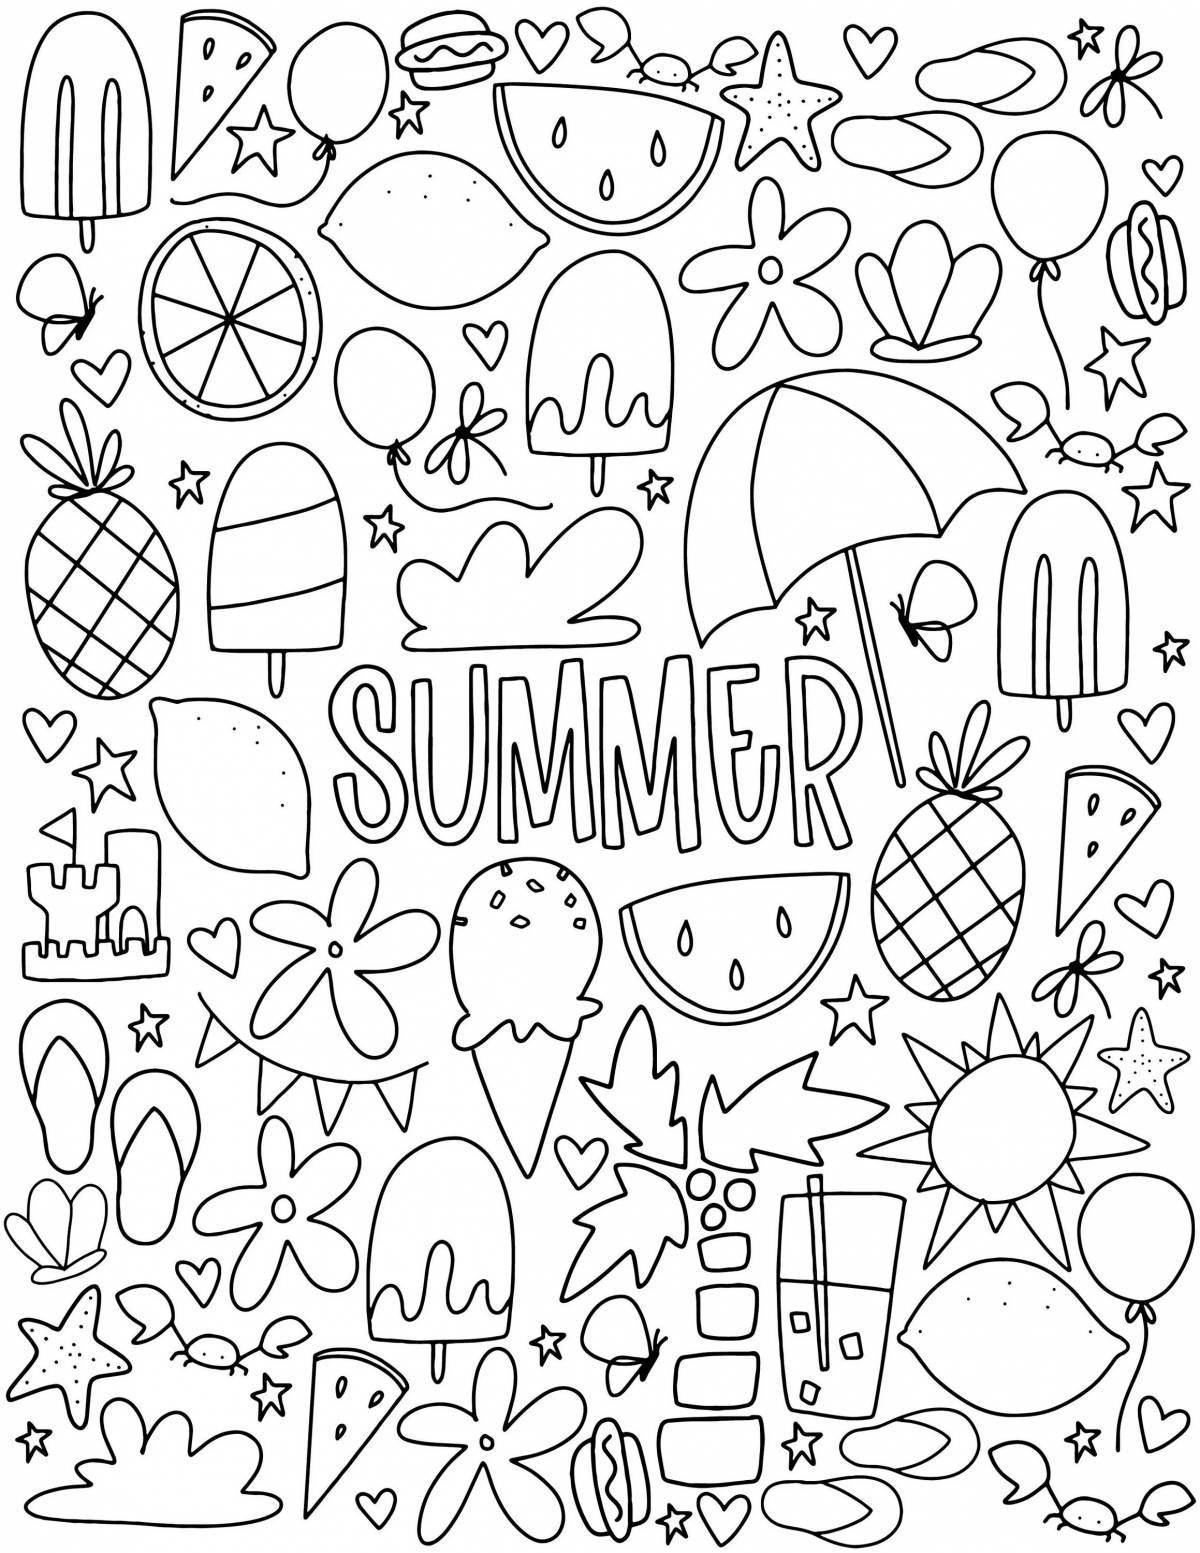 Color-frenzy coloring page collage